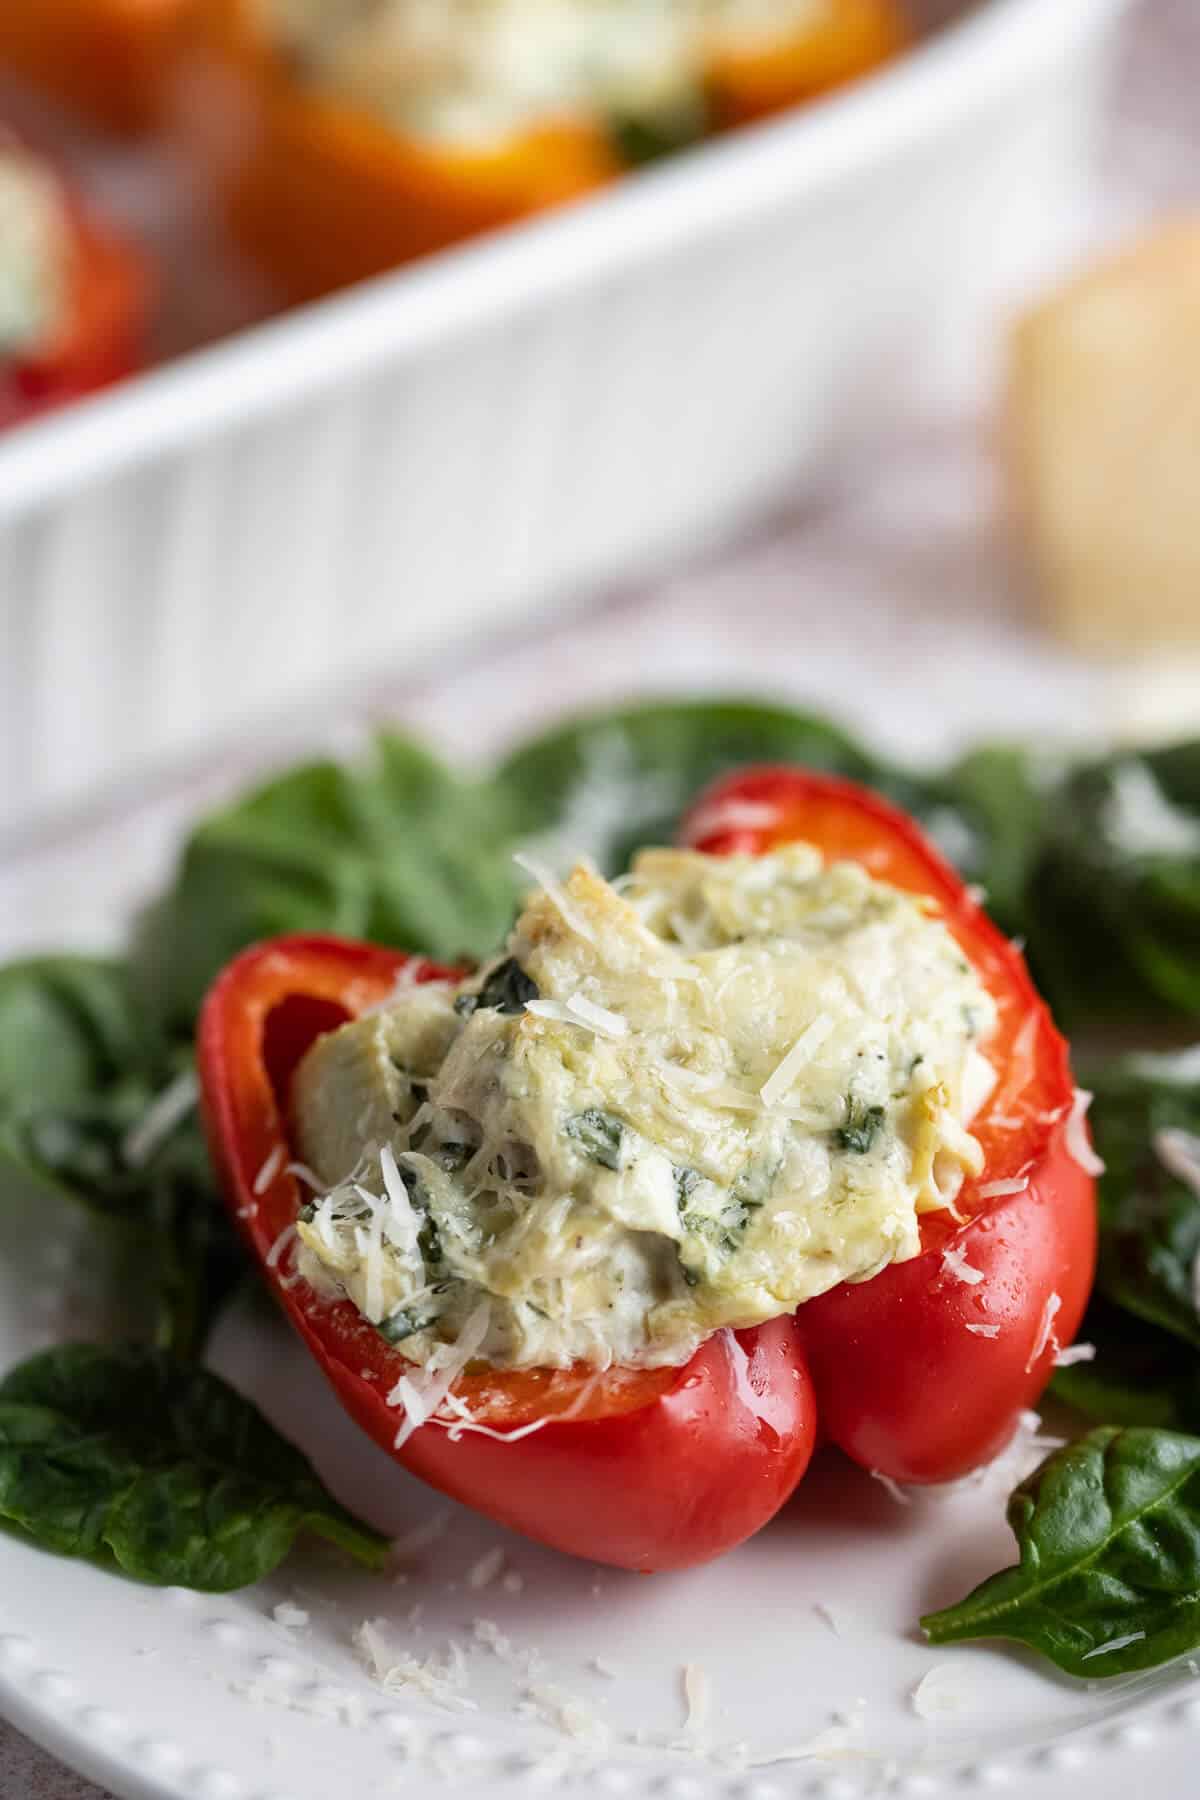 Red bell pepper half full of chicken, spinach, and artichoke dip on a bed of spinach.